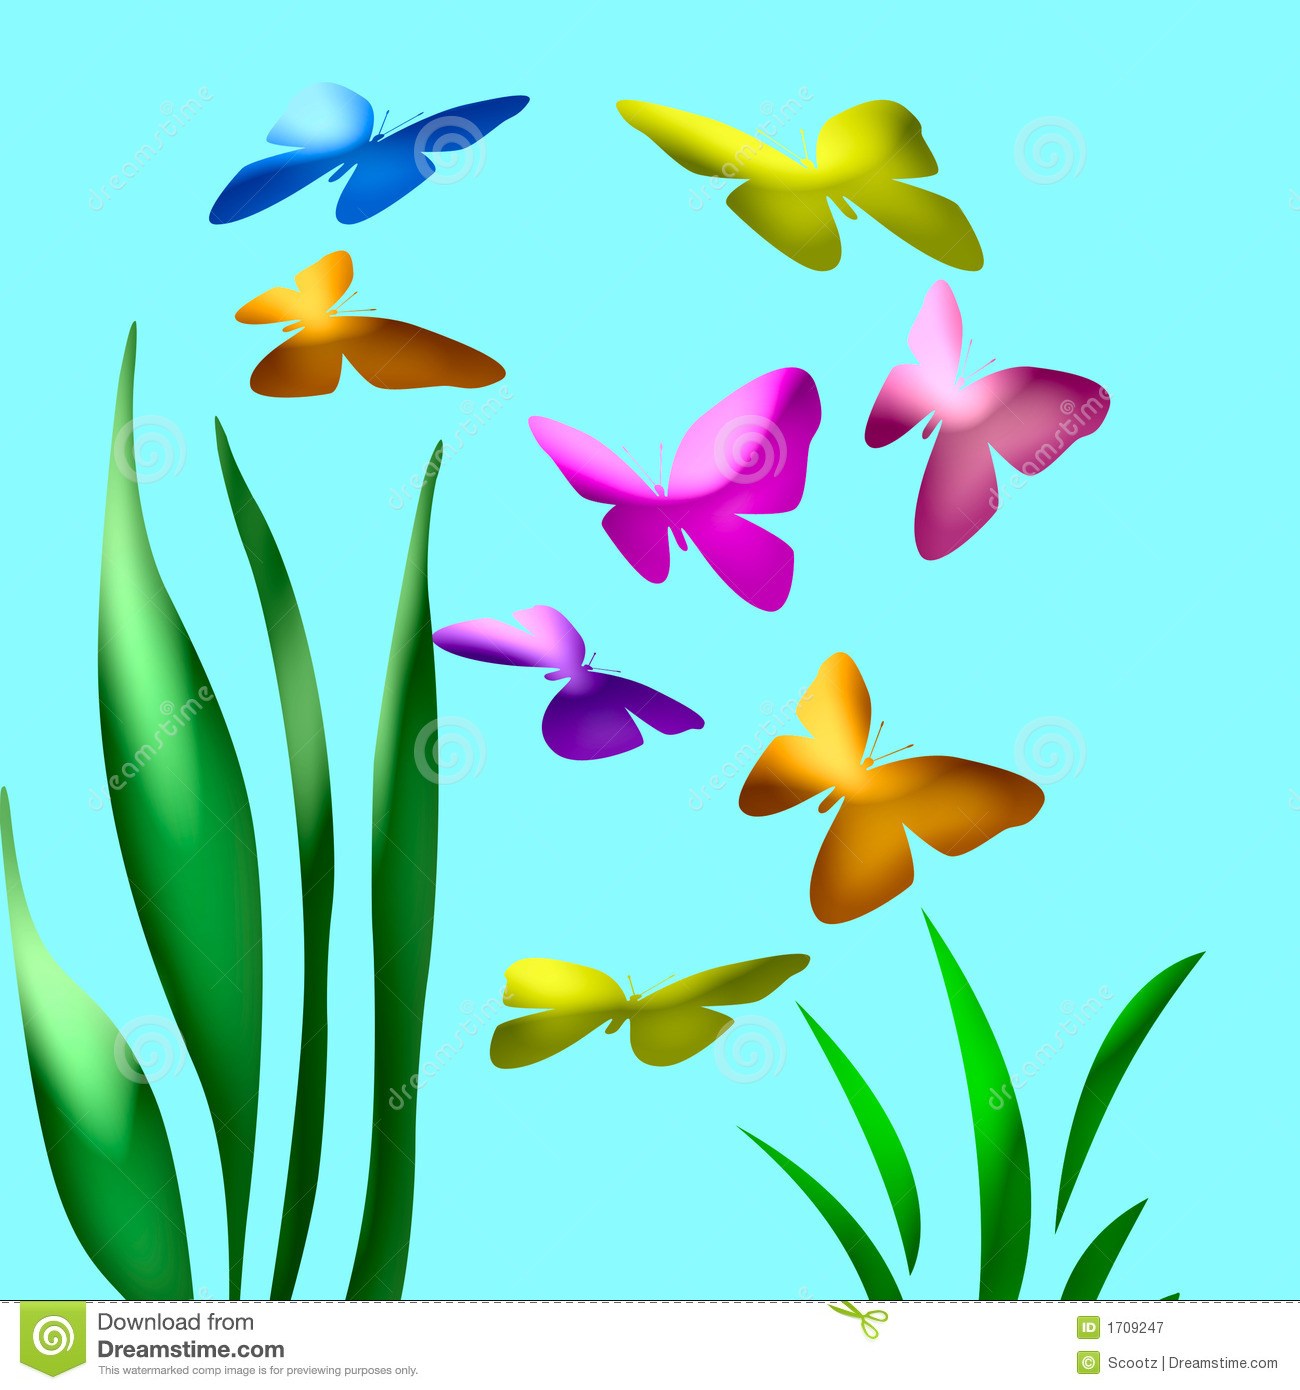 Butterfly garden clipart clipart images gallery for free